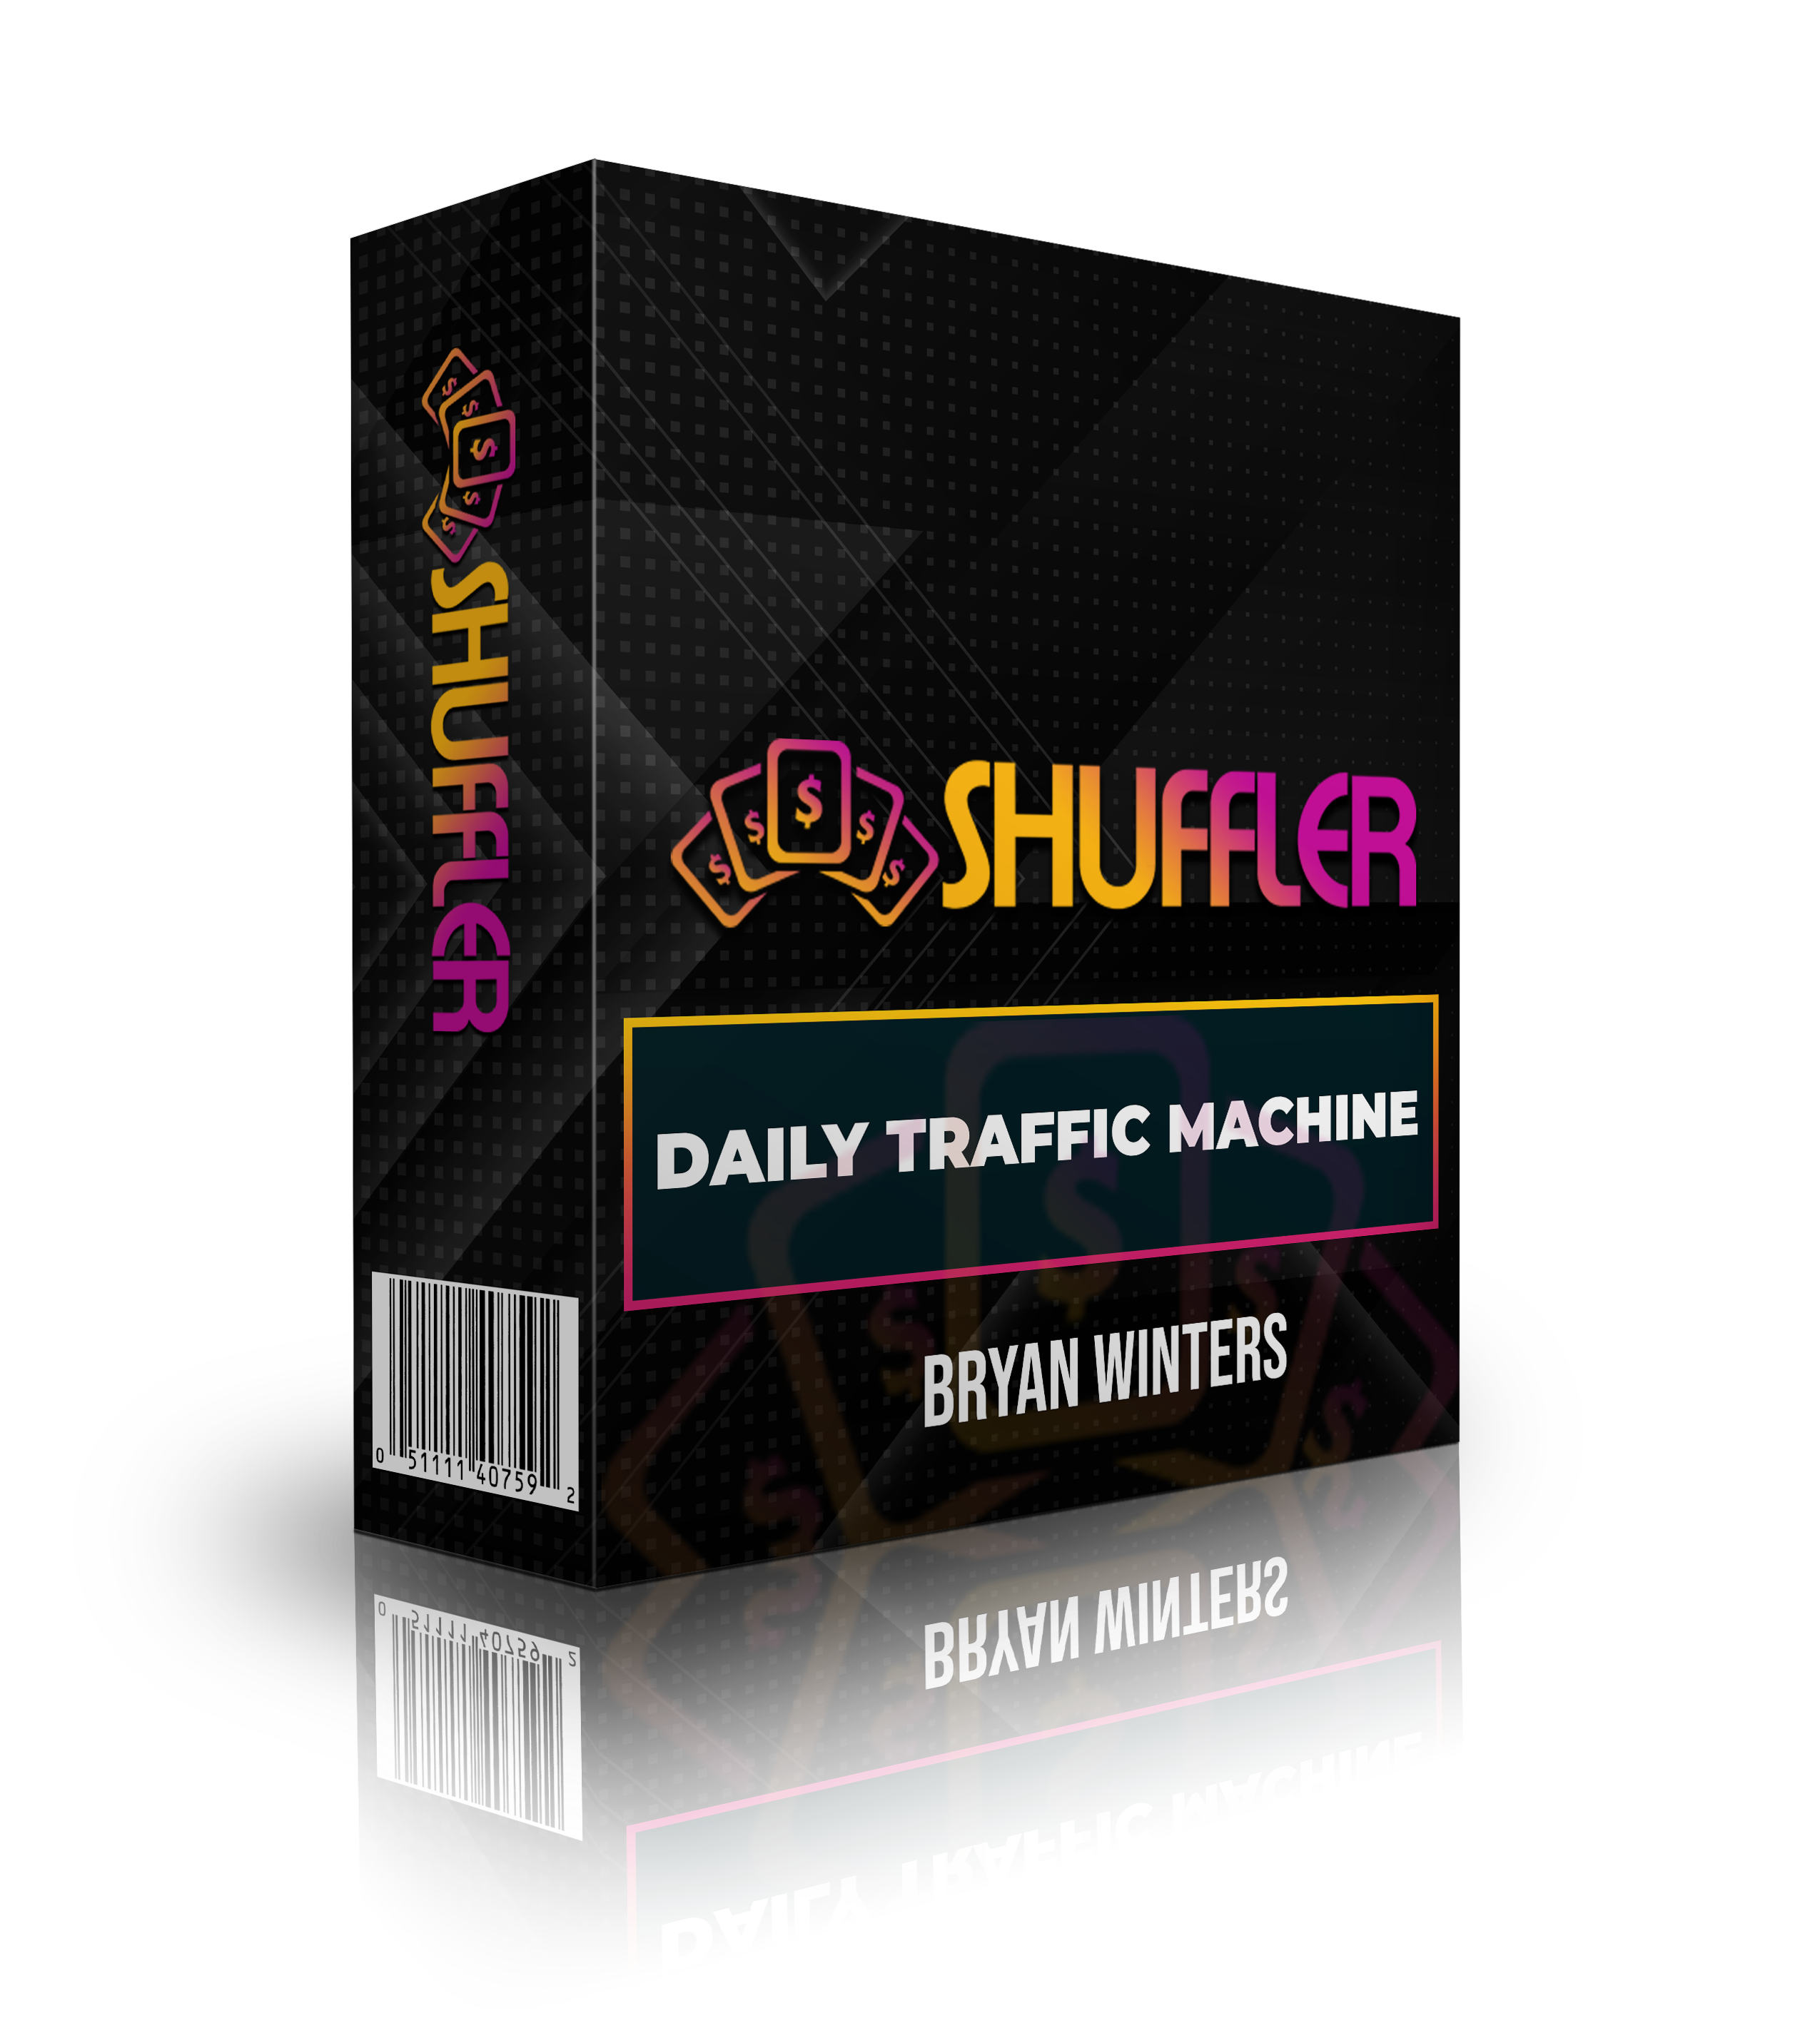 Shuffler is the world's 1st app to spin brand new squeeze pages and complete DFY funnels, giving users over 52 billion unique viral funnels to choose from in addition to genuine opt-in email leads delivered on literal autopilot.